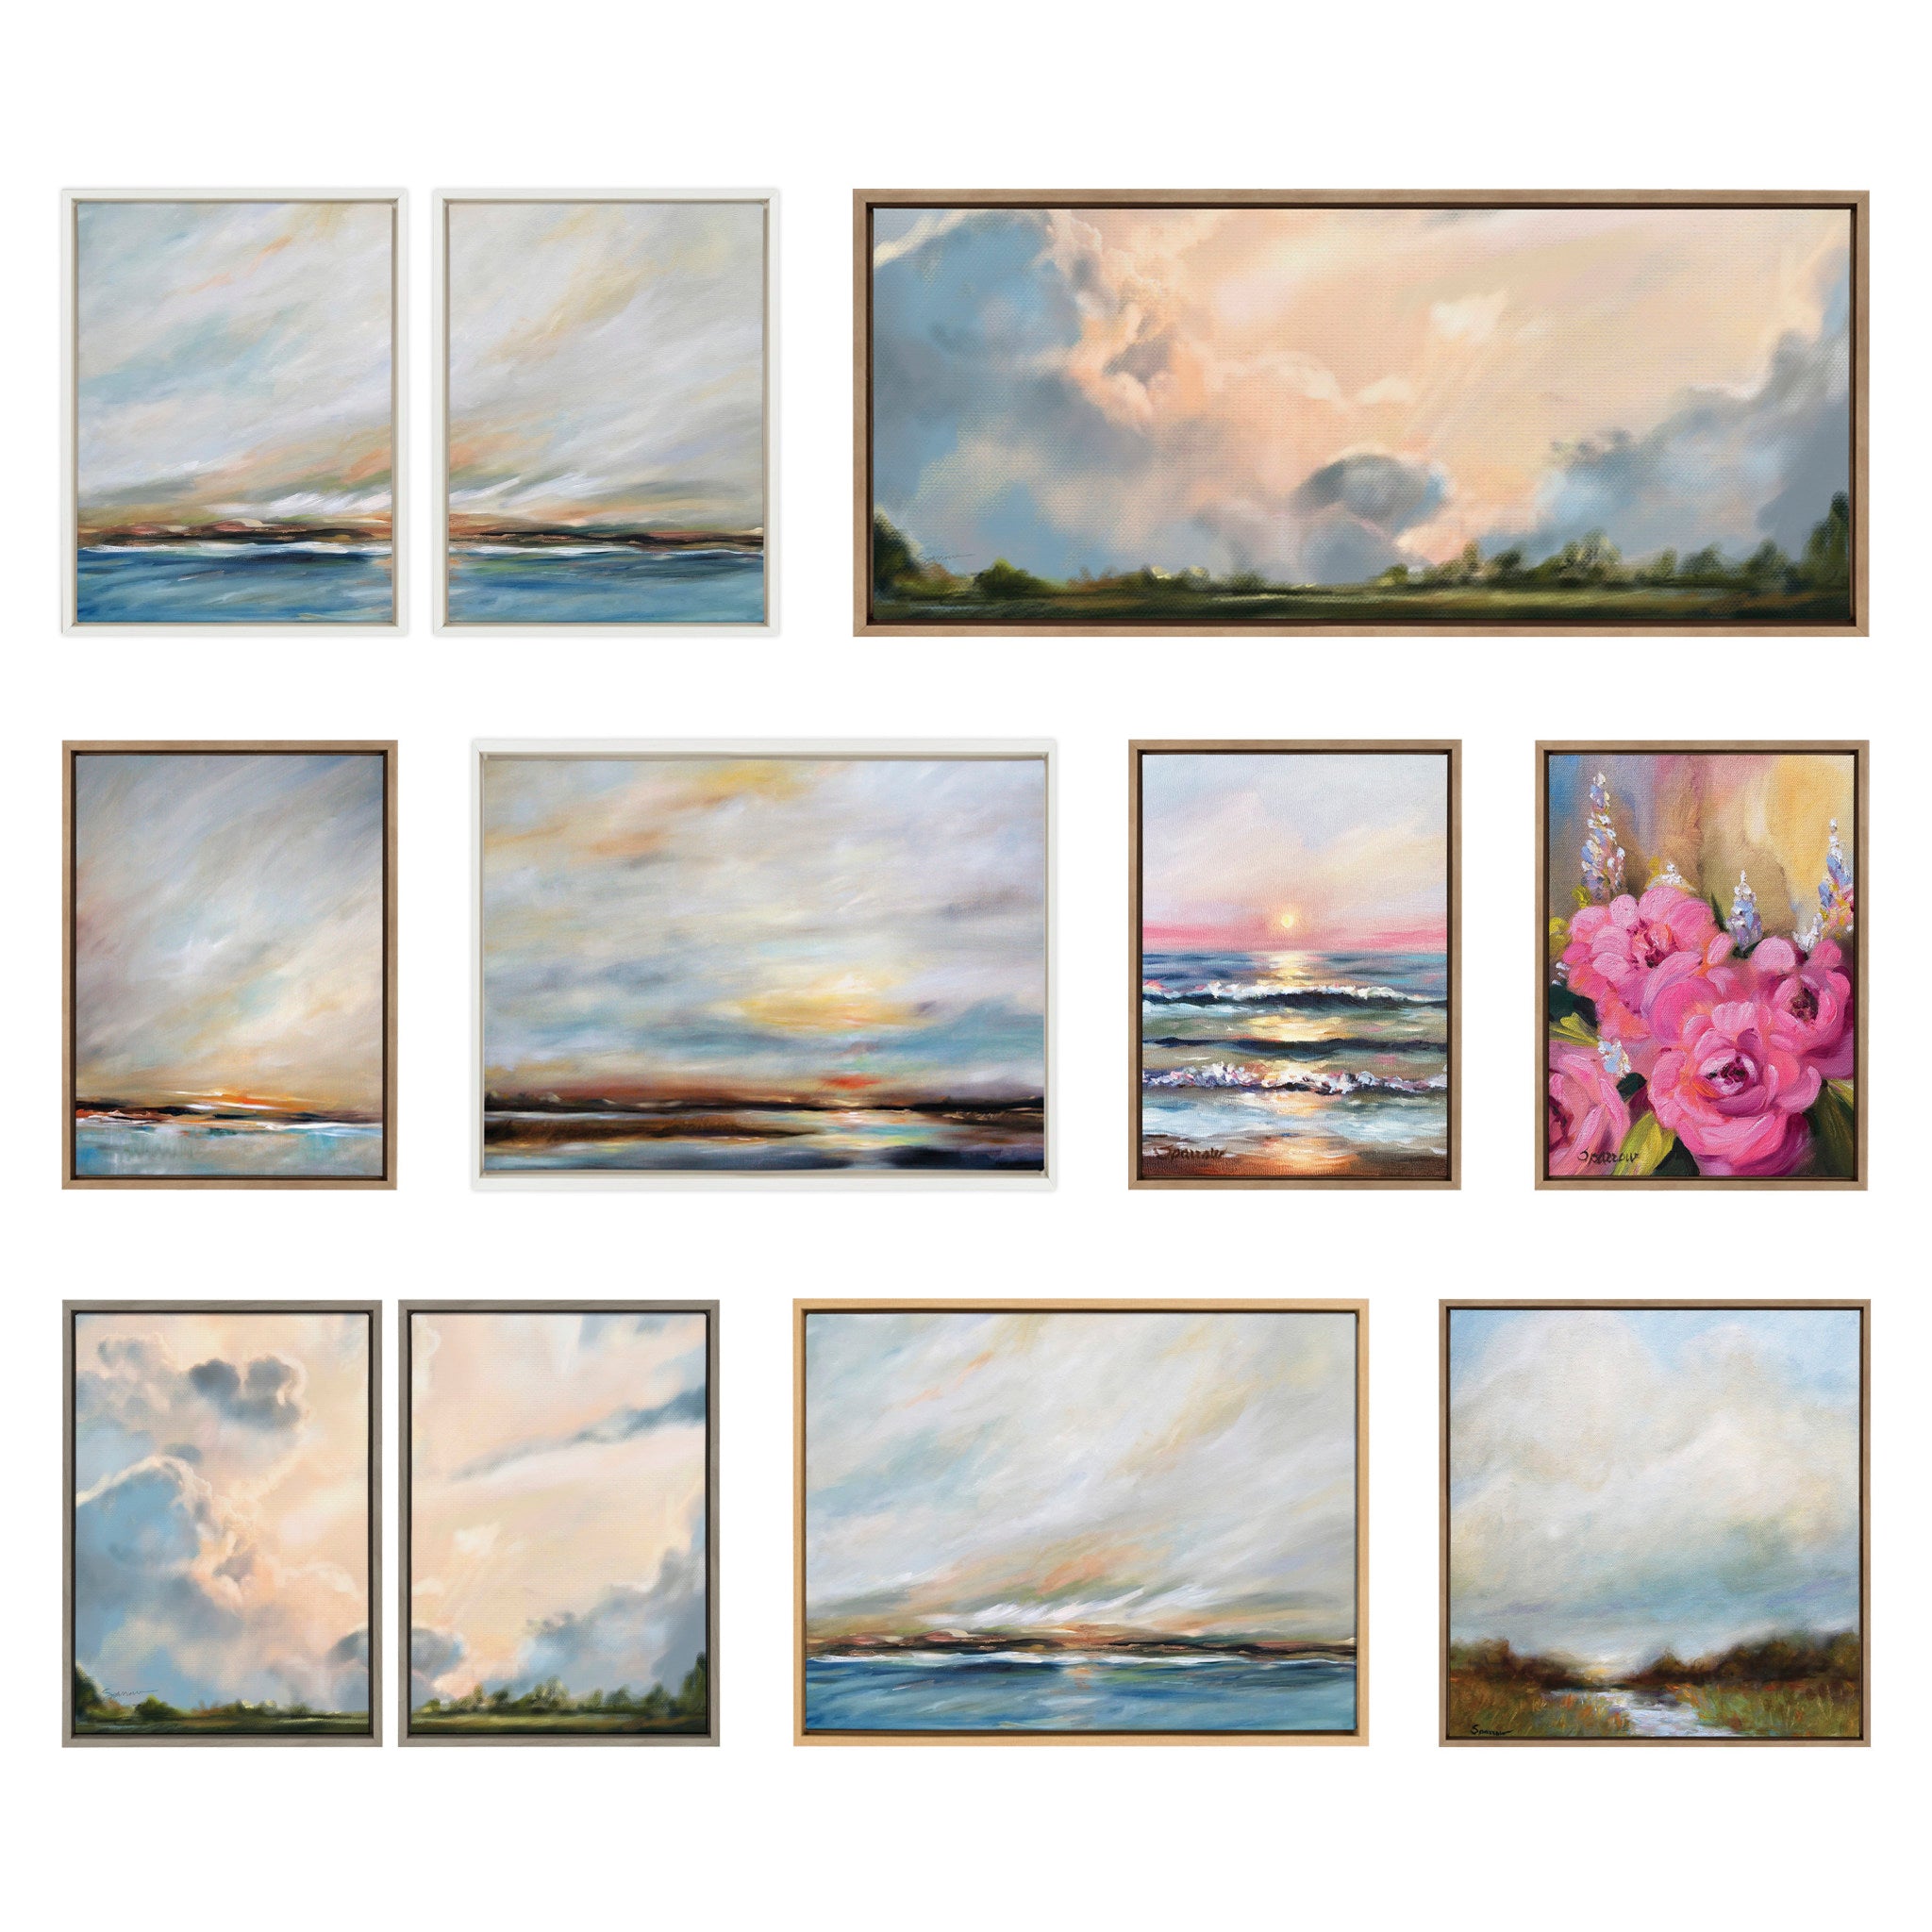 Sylvie Sunday Morning, Tranquility and Clouds Framed Canvas Art Set by Mary Sparrow